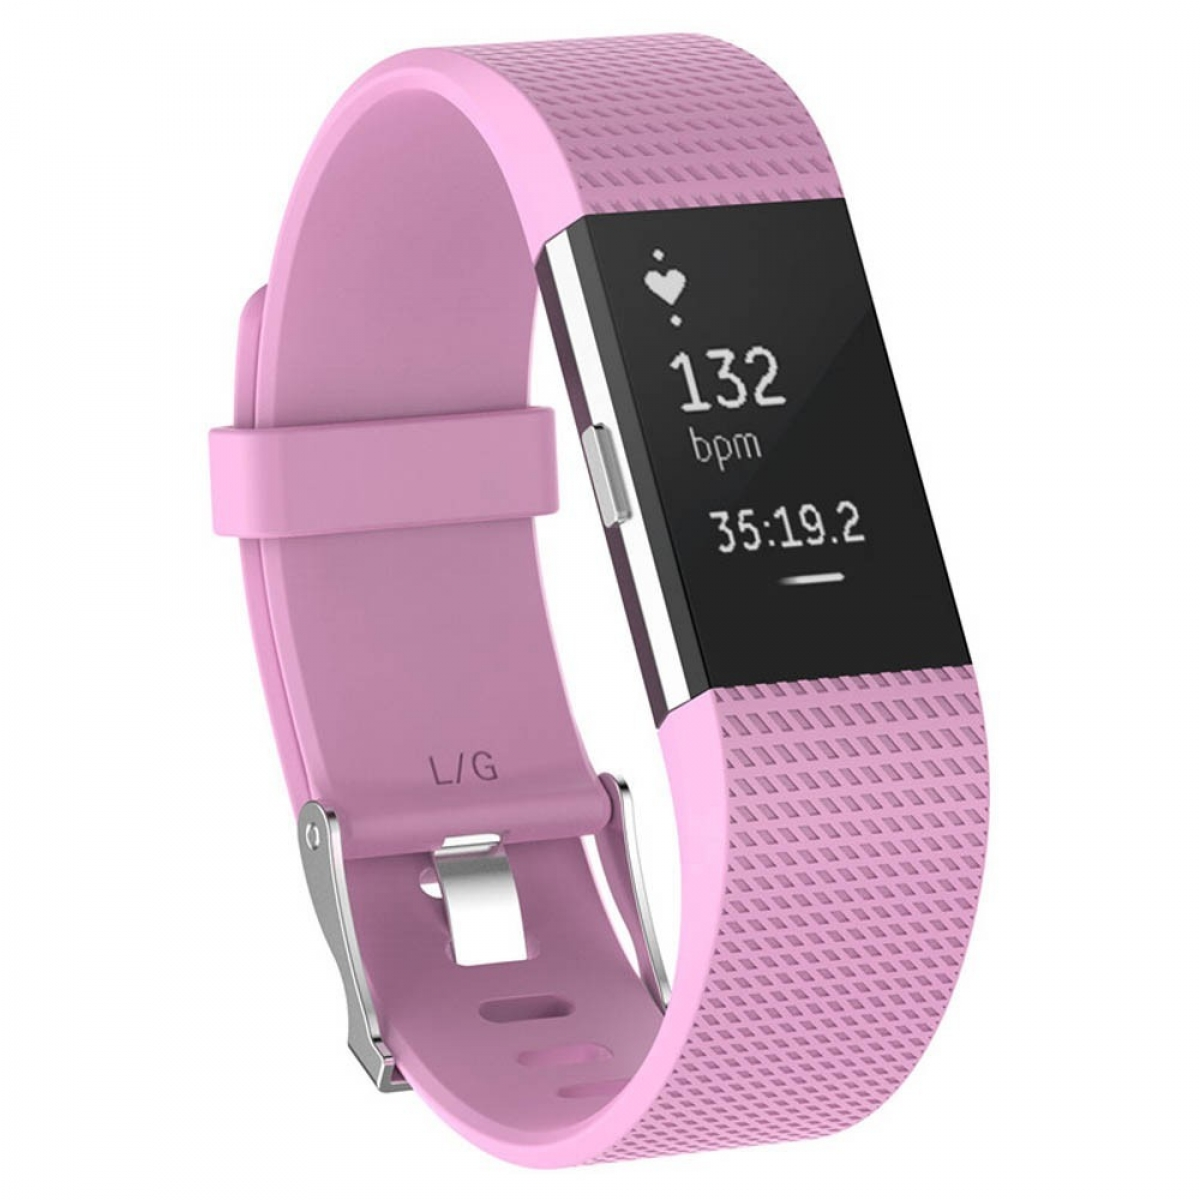 Multicolor Charge Silikon, Smartband, Fitbit 2, CASEONLINE Fitbit,